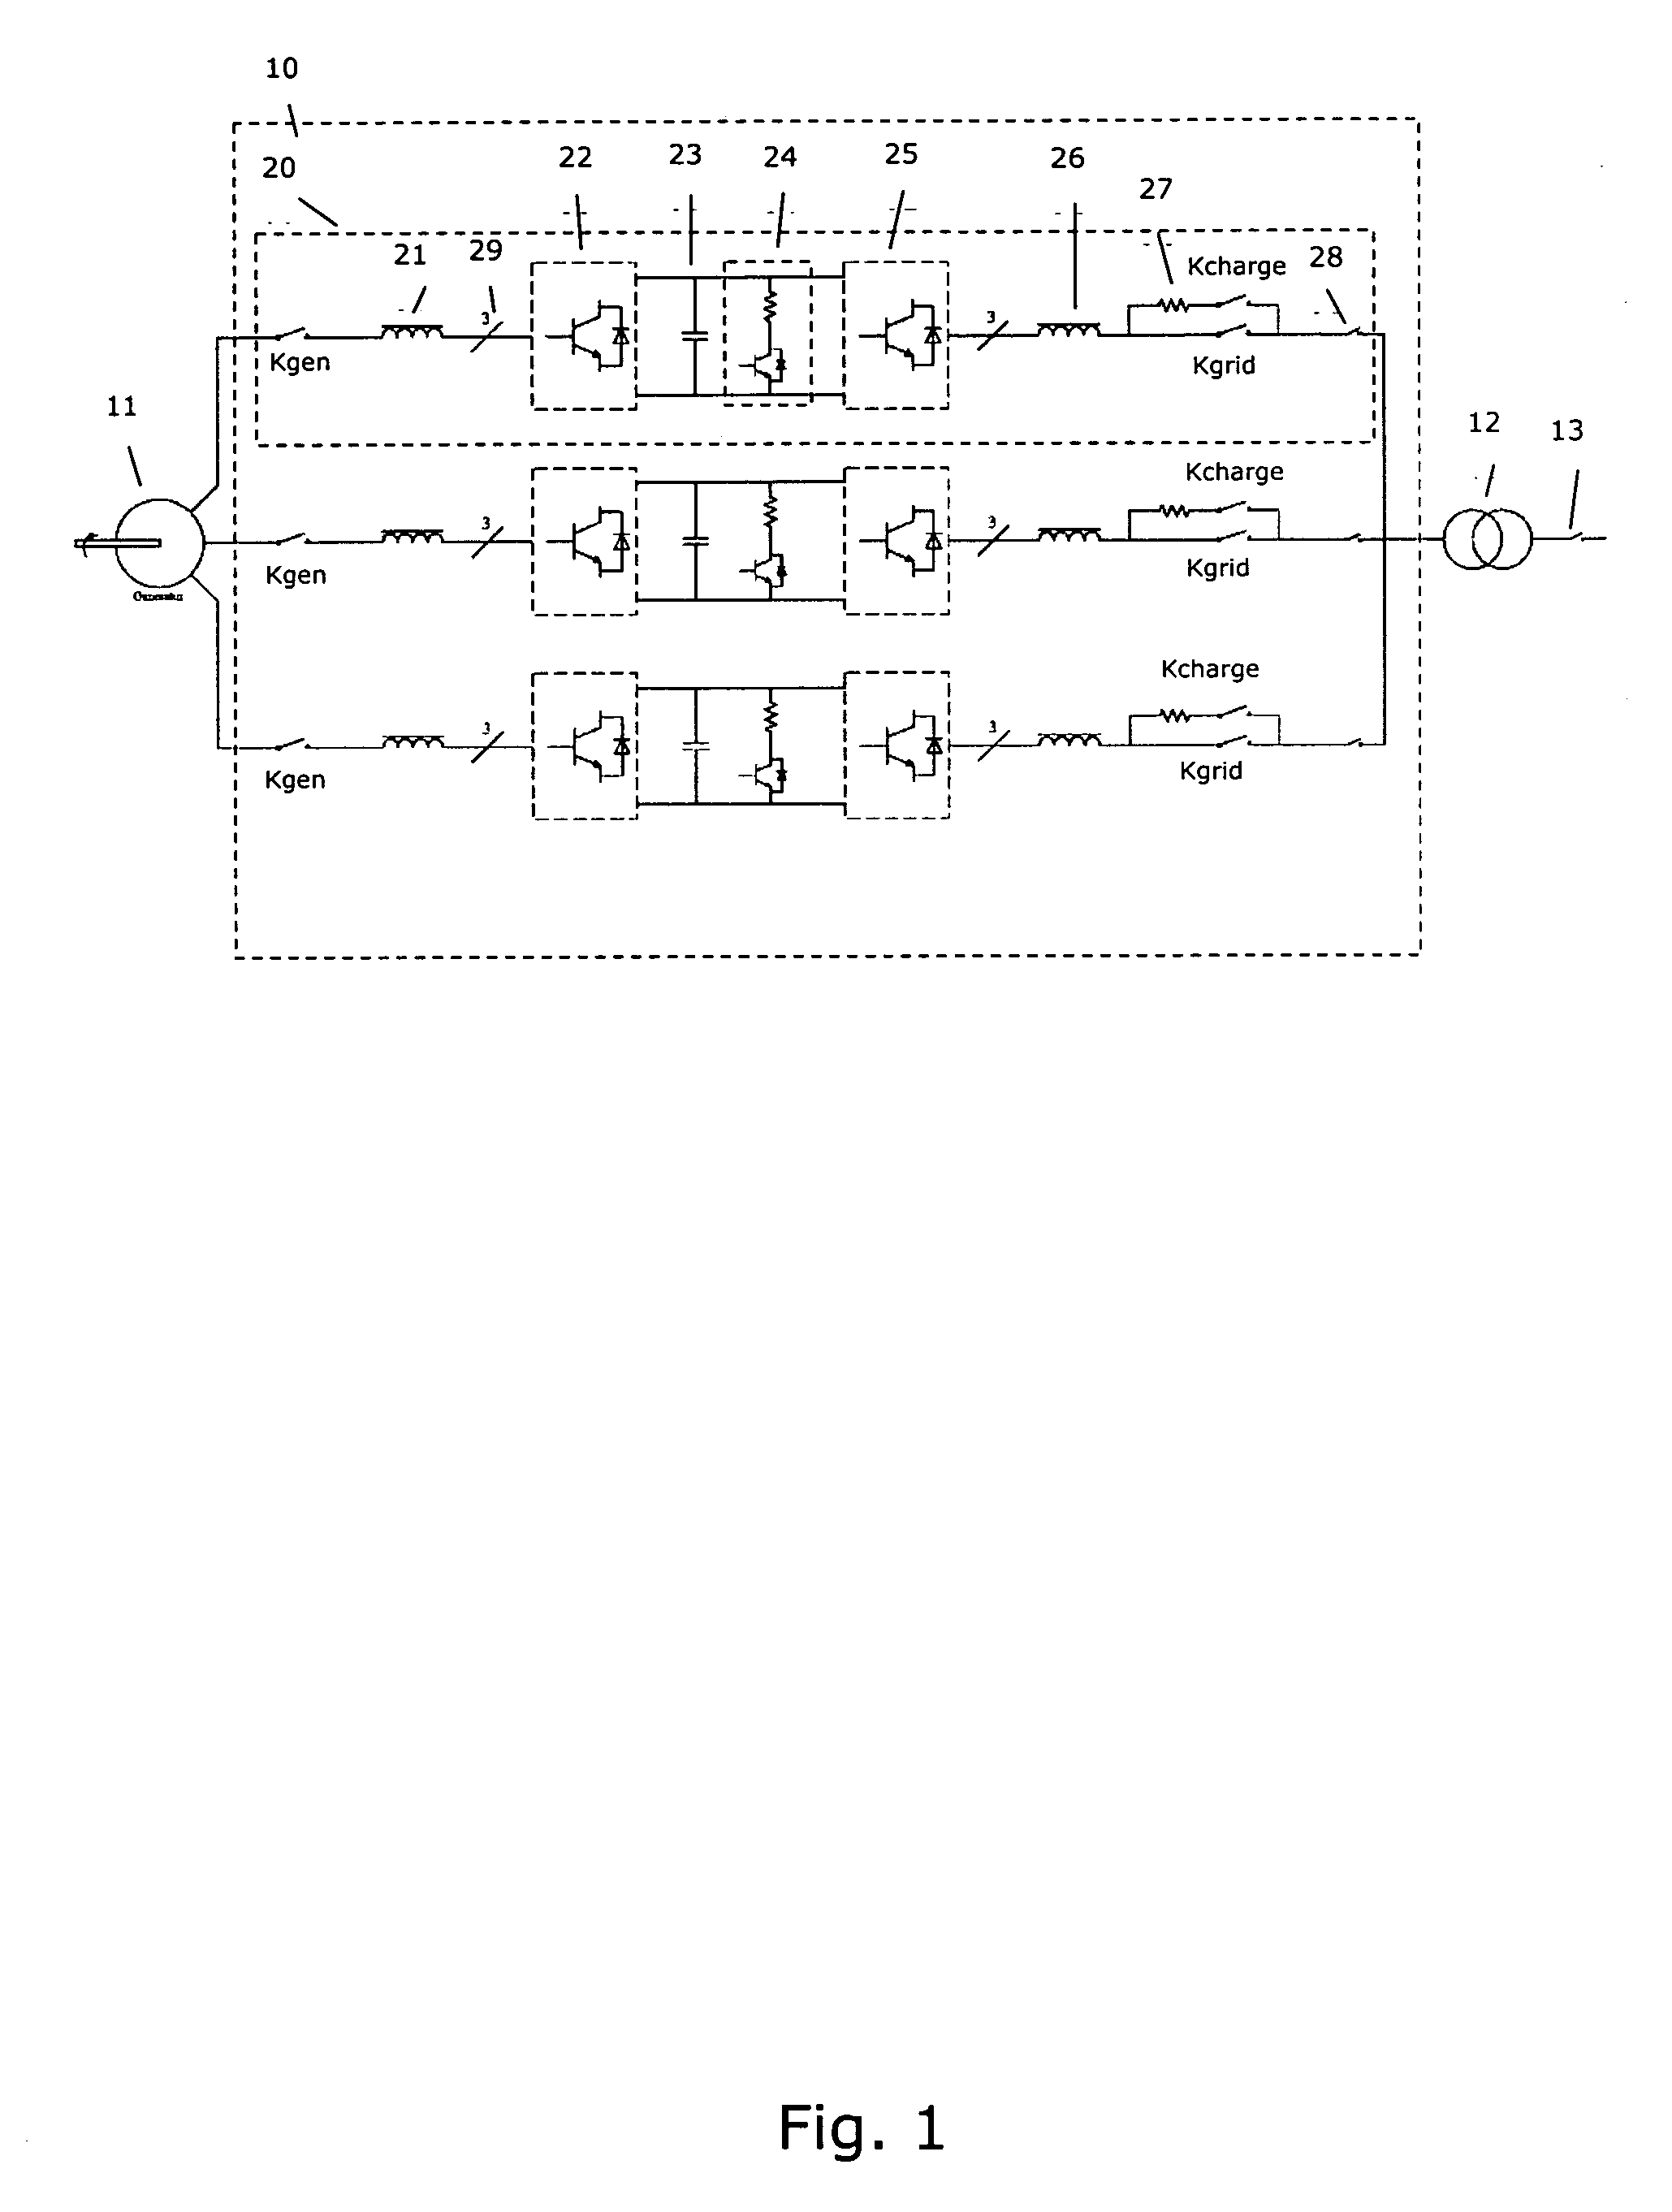 Method for operation of a converter system